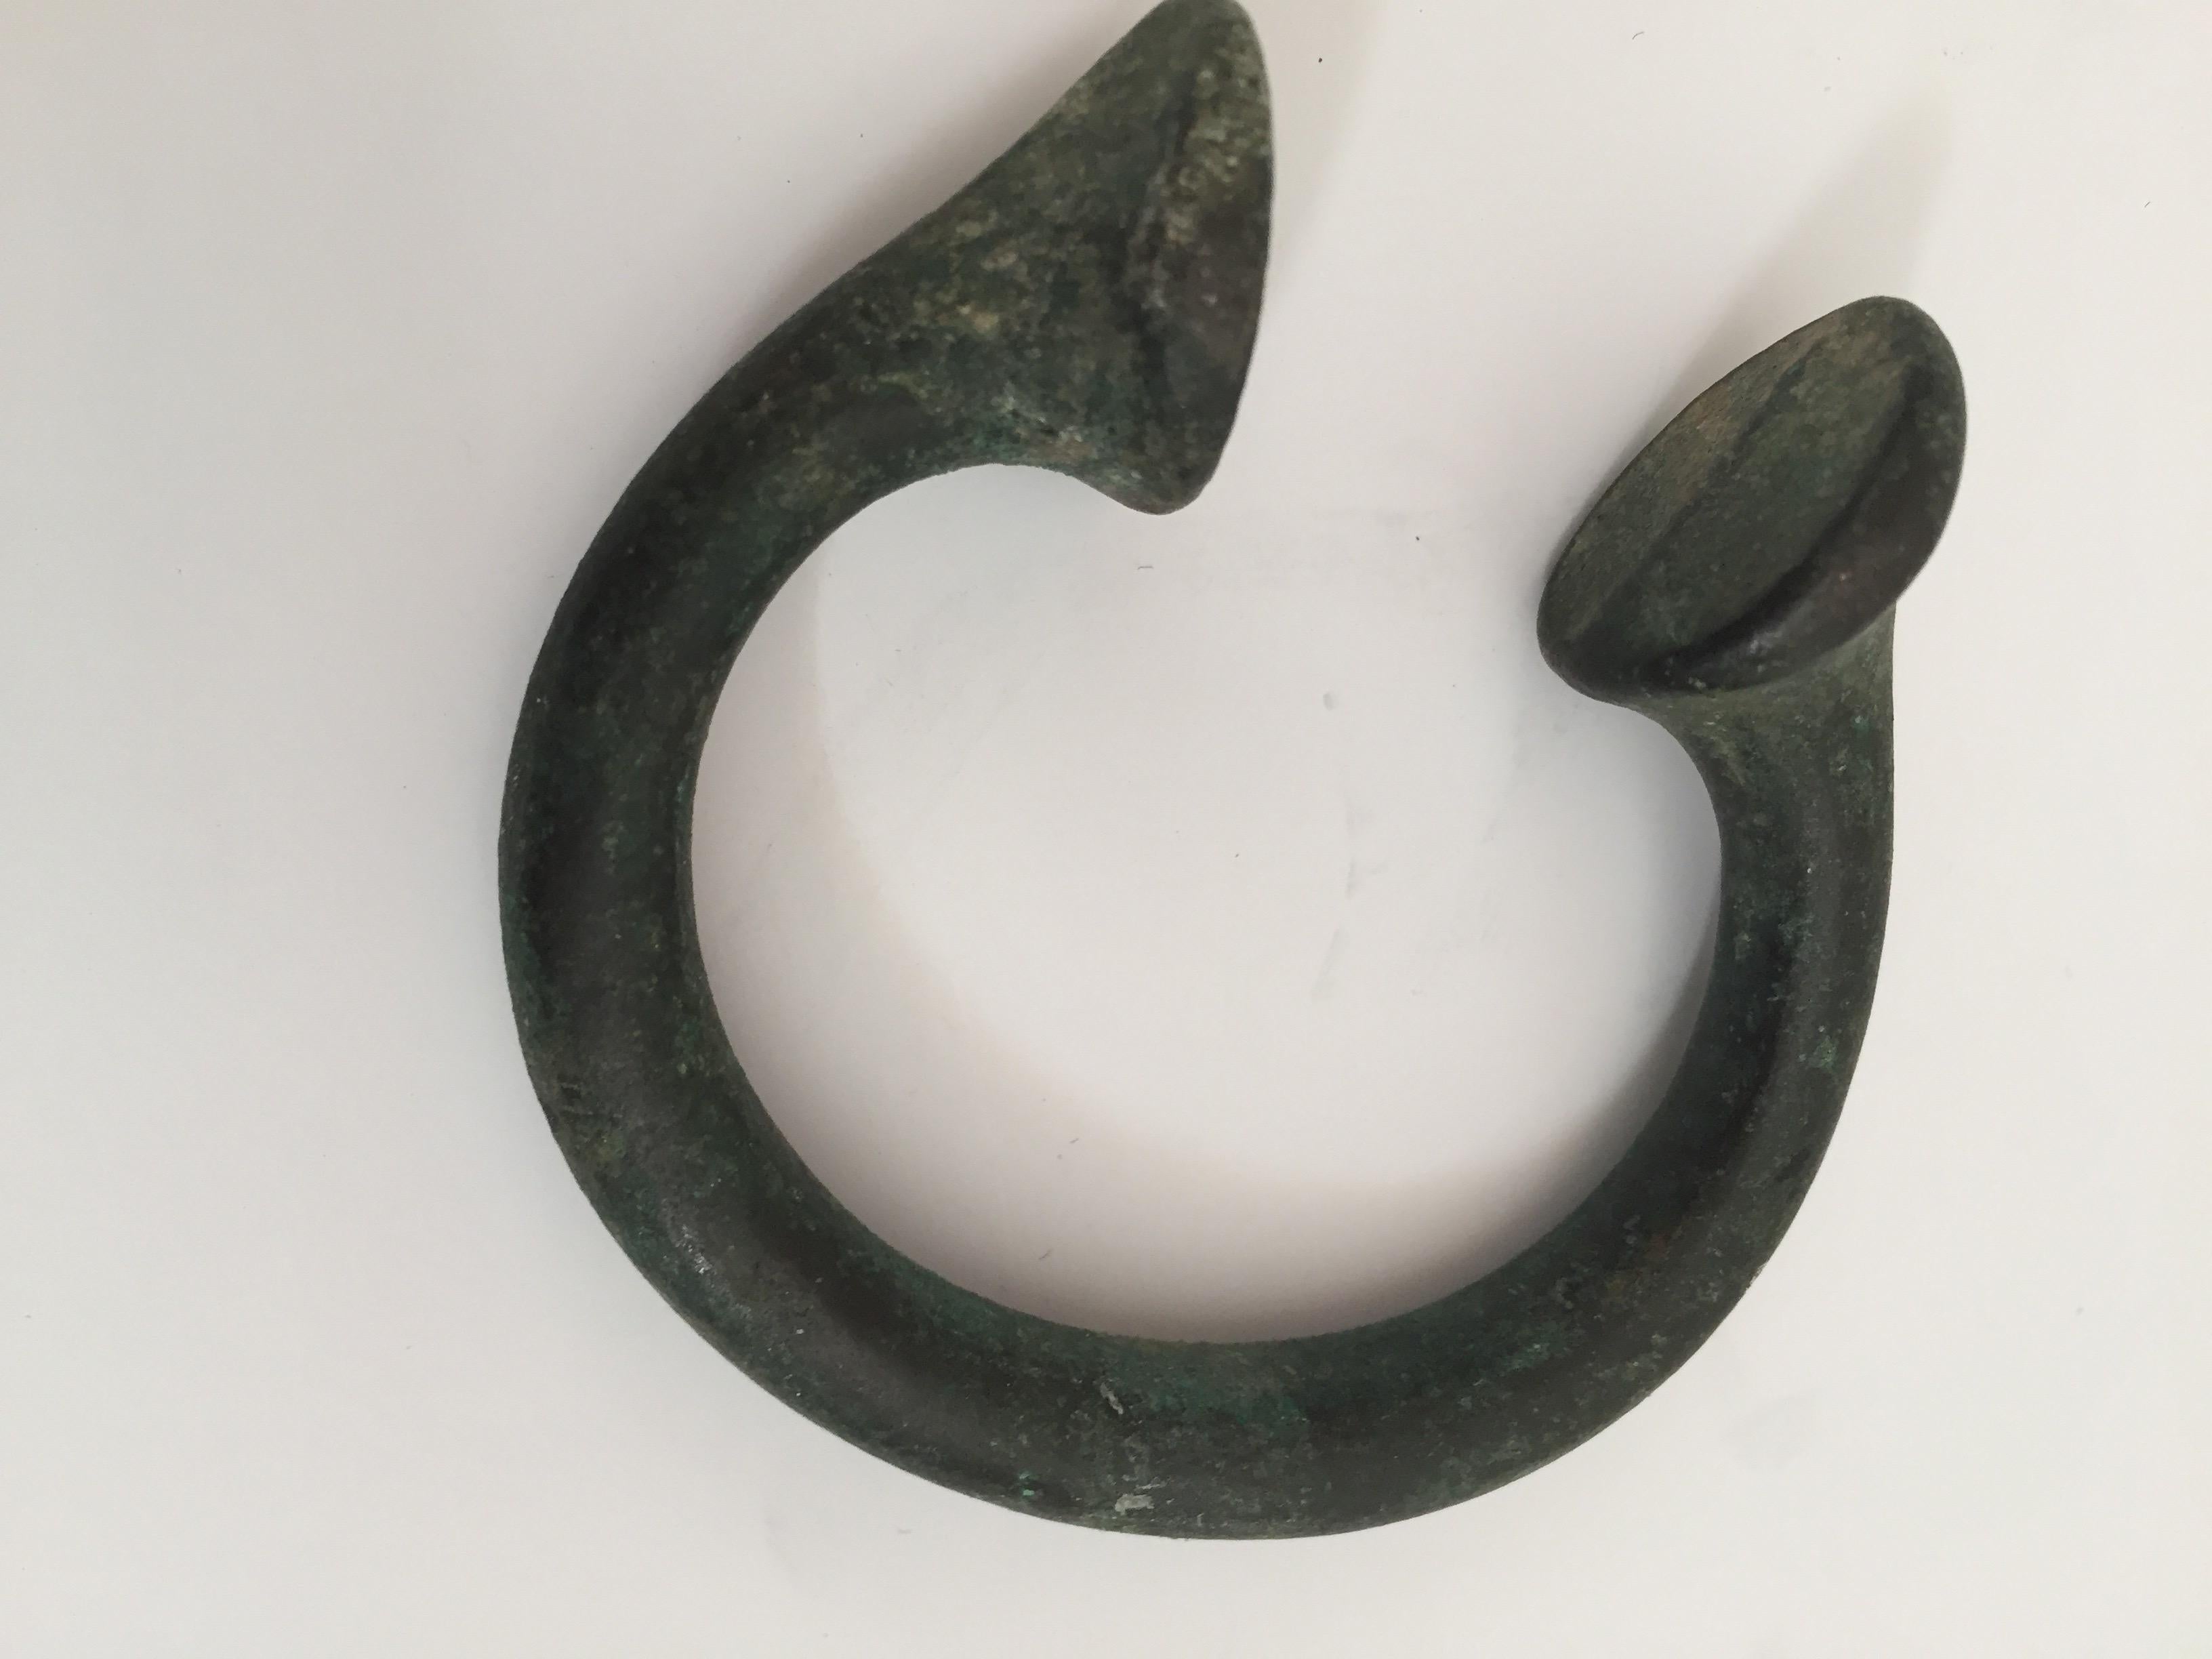 Antique bronze Okpoho-type manilla currency from south-eastern Nigeria.
Manillas (which were a traditional African exchange medium) were originally metal bracelets or armlets. Later forms were made of copper, bronze, or brass open rings (penannular